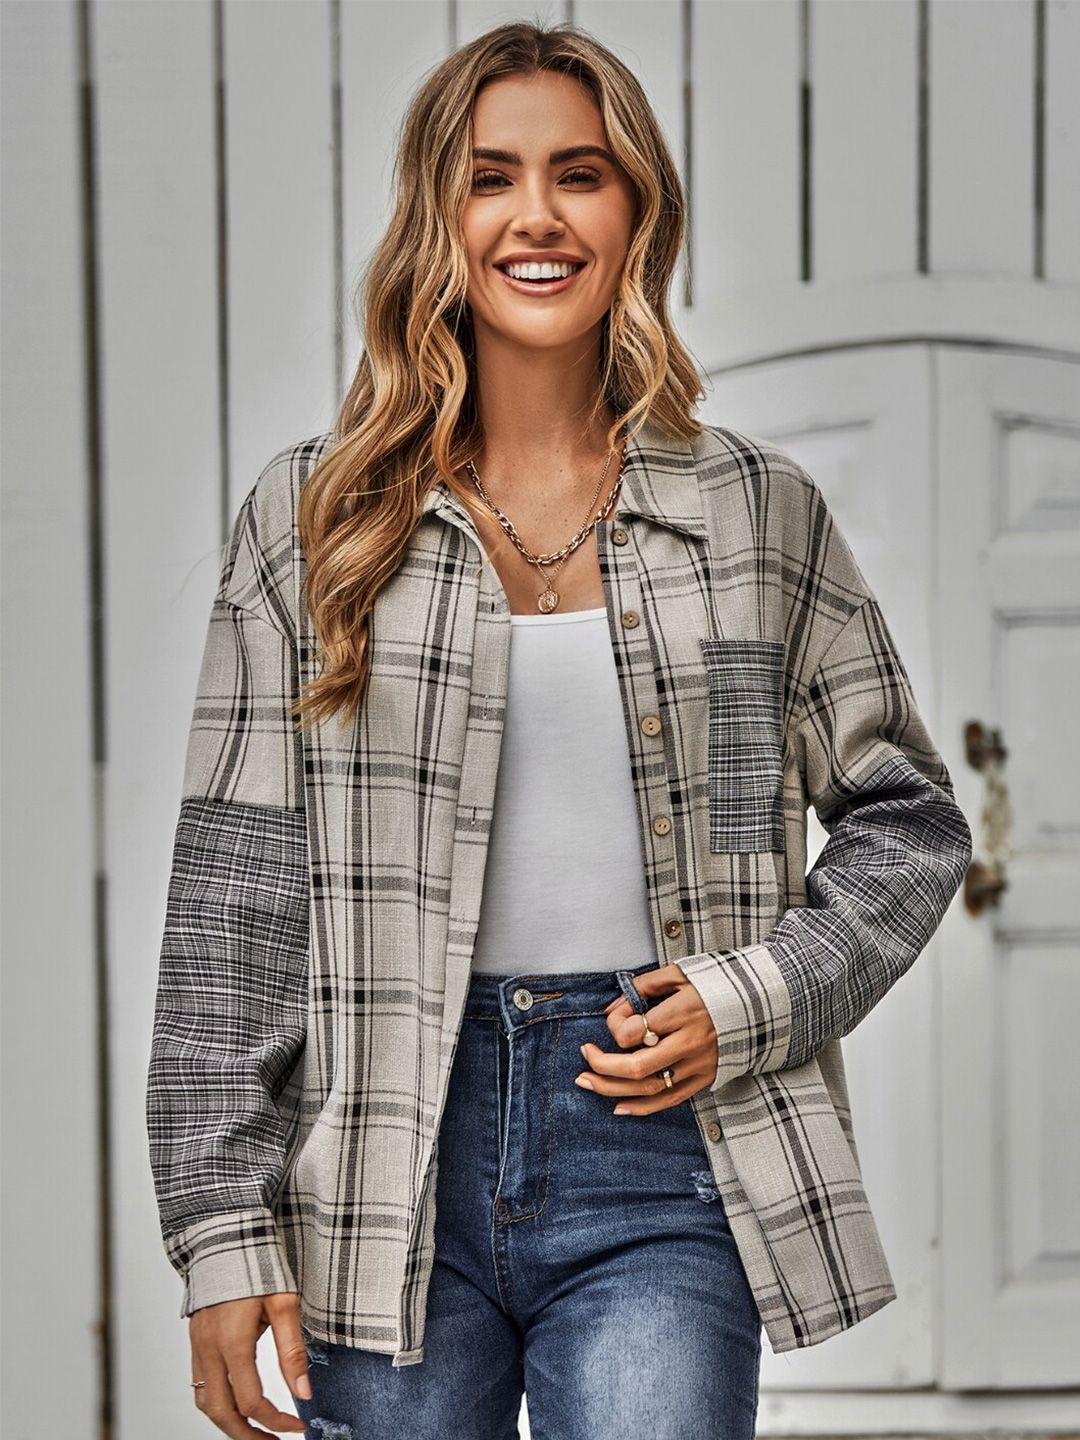 stylecast grey checked shirt style top